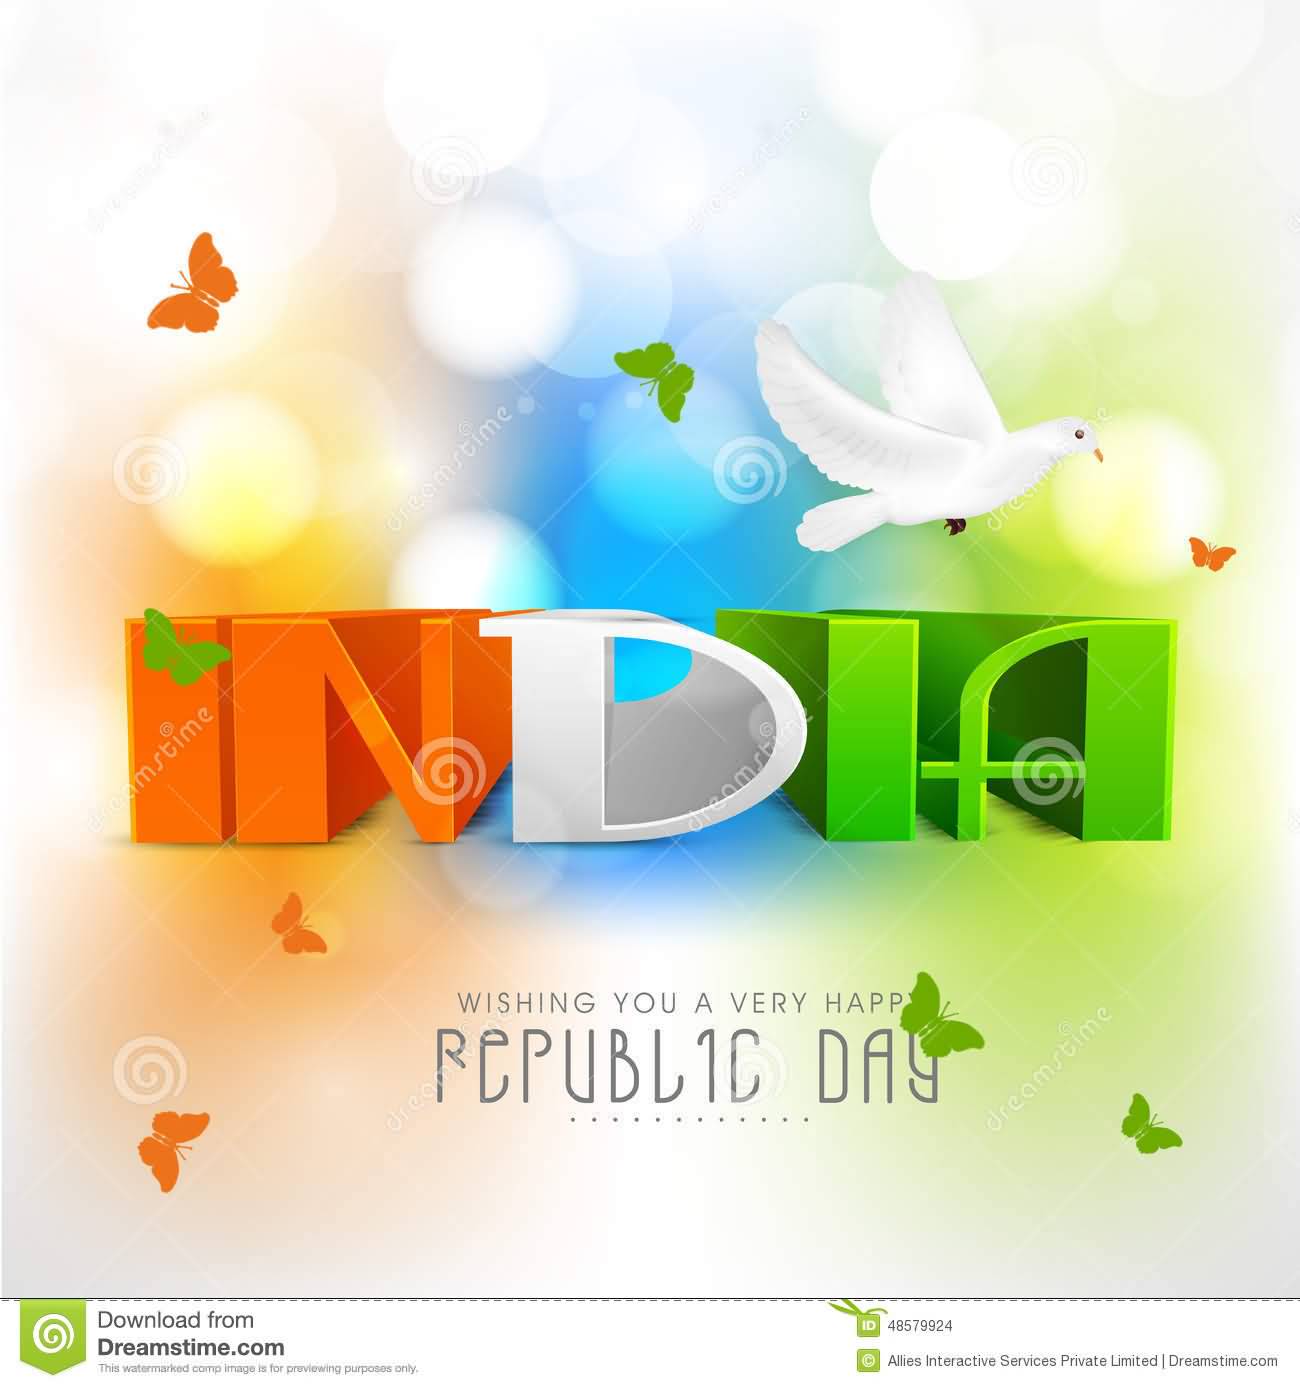 Wishing You A Very Happy Republic Day India Greeting Card